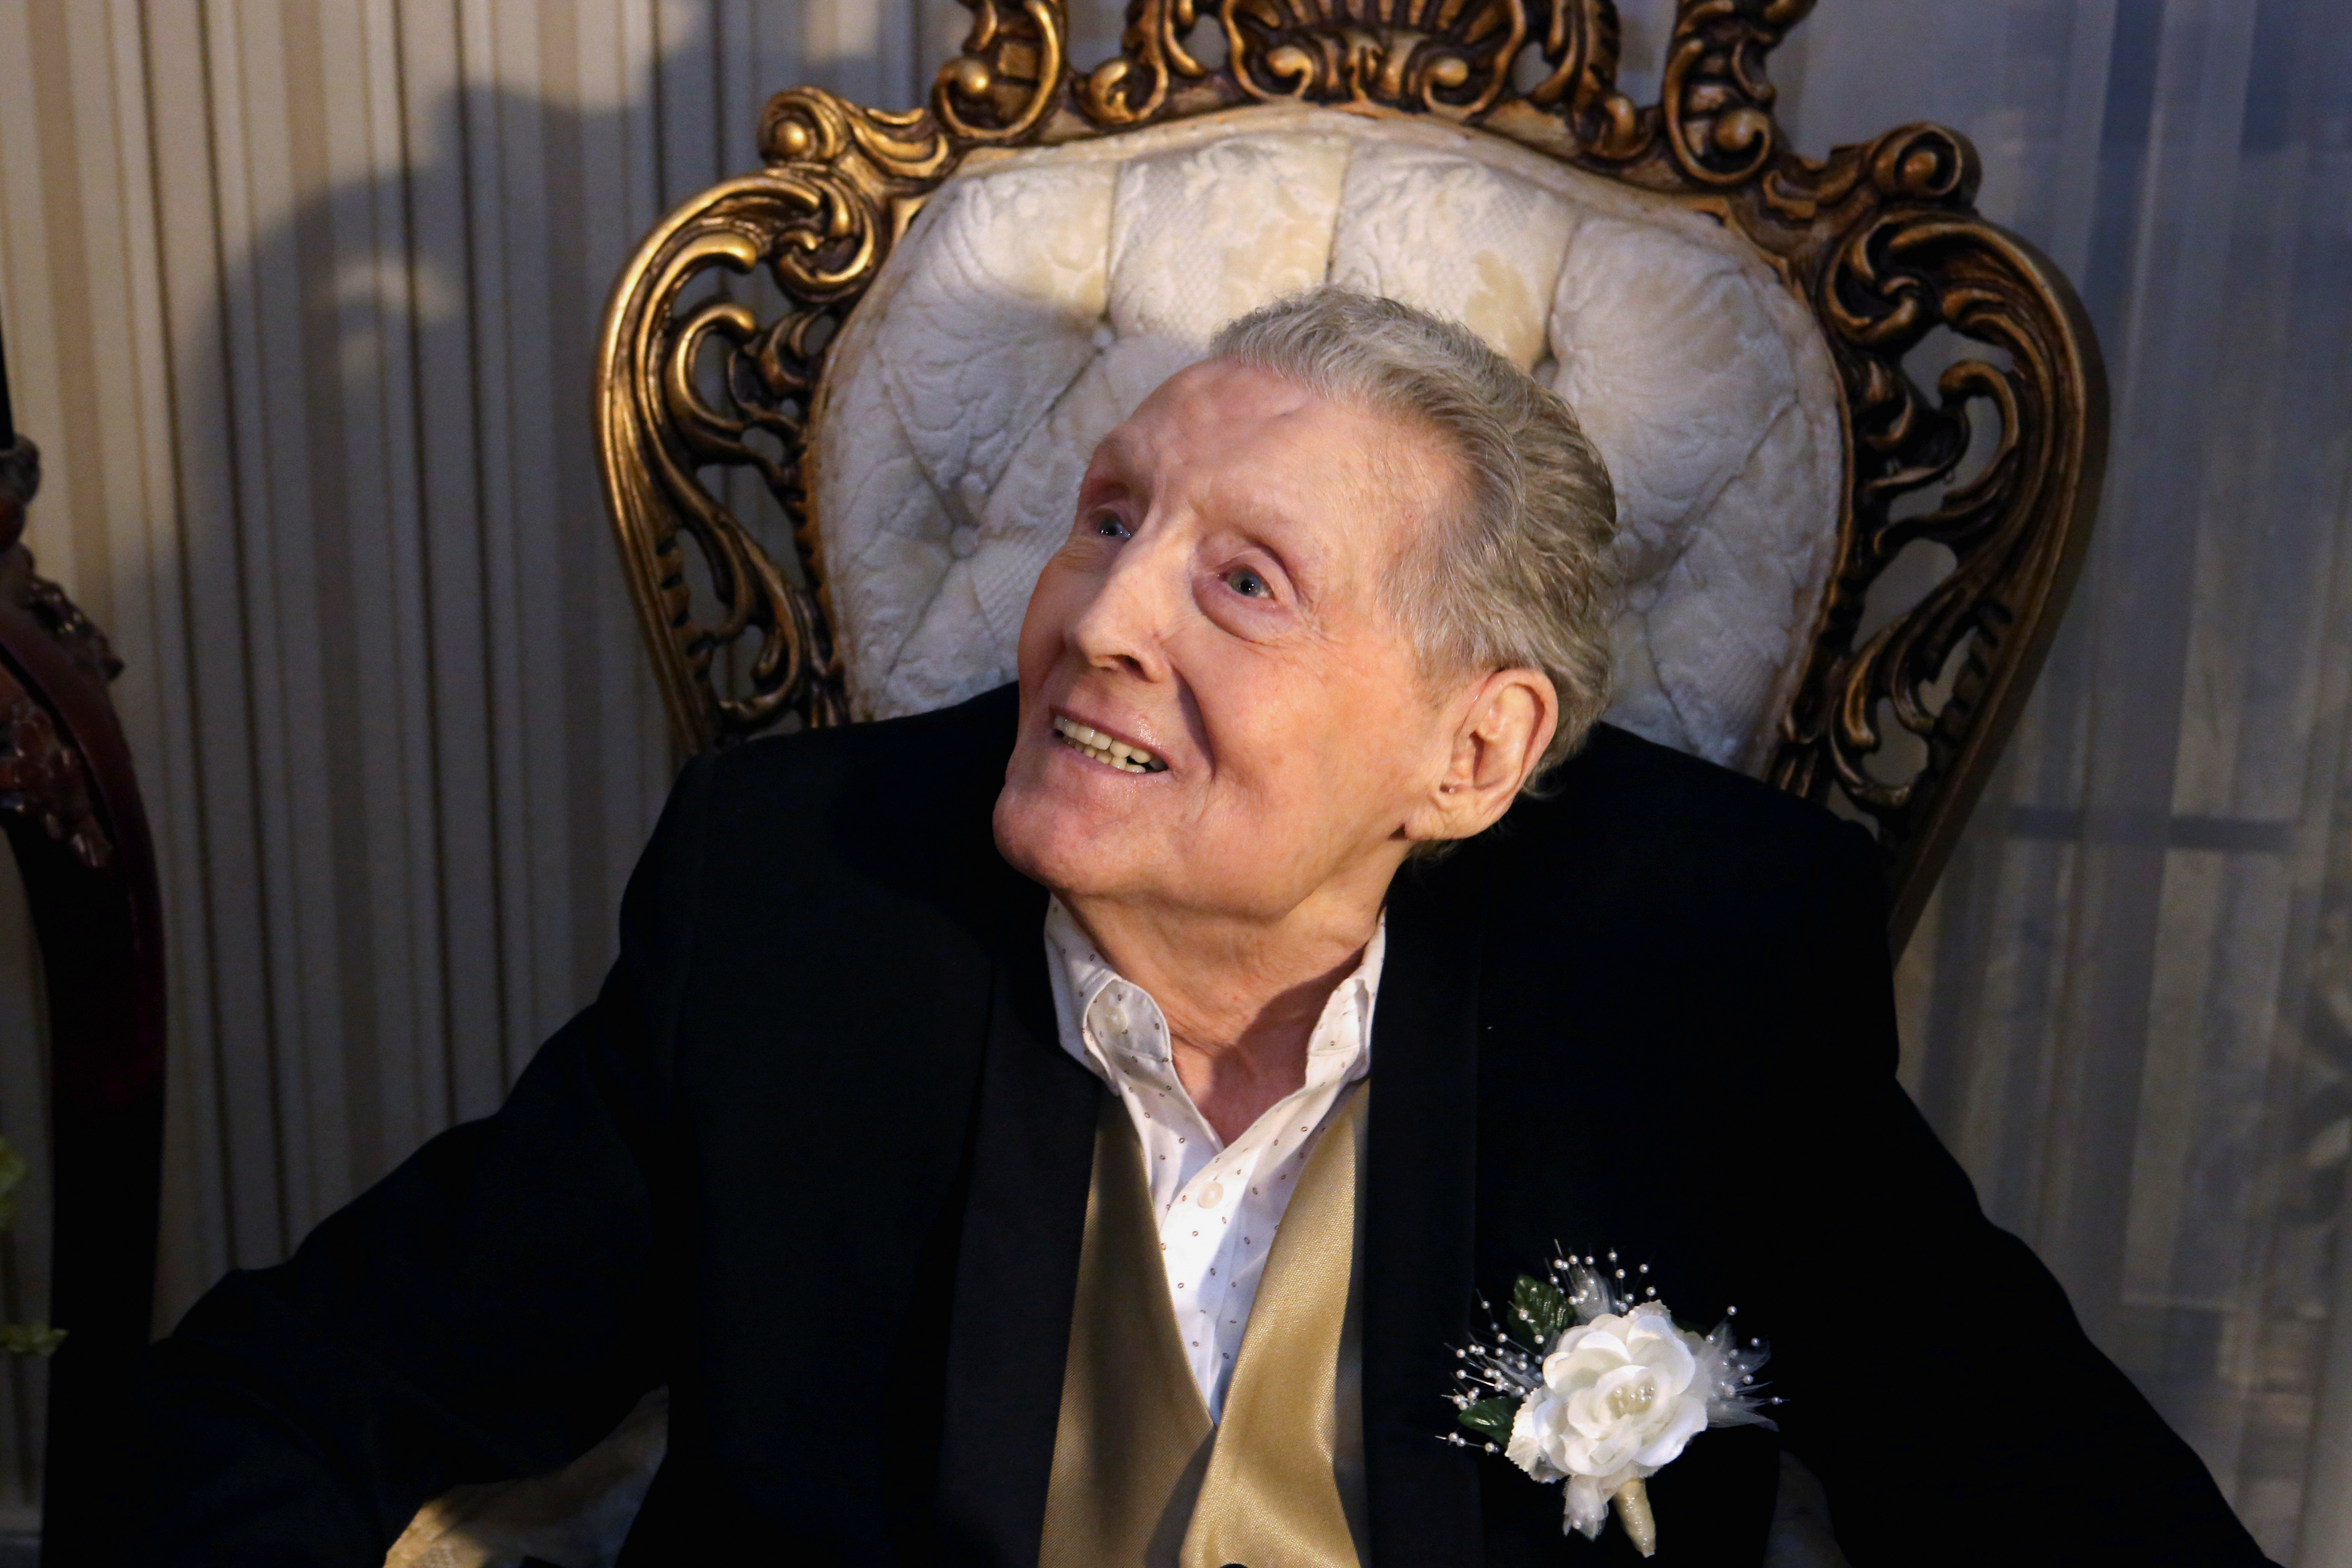 A vaccinated 85-year-old Jerry Lee Lewis, the last living member of the Million Dollar Quartet that recorded many hits at Memphis' Sun Records in the 1950s, renews marriage vows with 7th wife Judith at his ranch in Nesbit, Mississippi, U.S. March 9, 2021. REUTERS/Karen Pulfer Focht